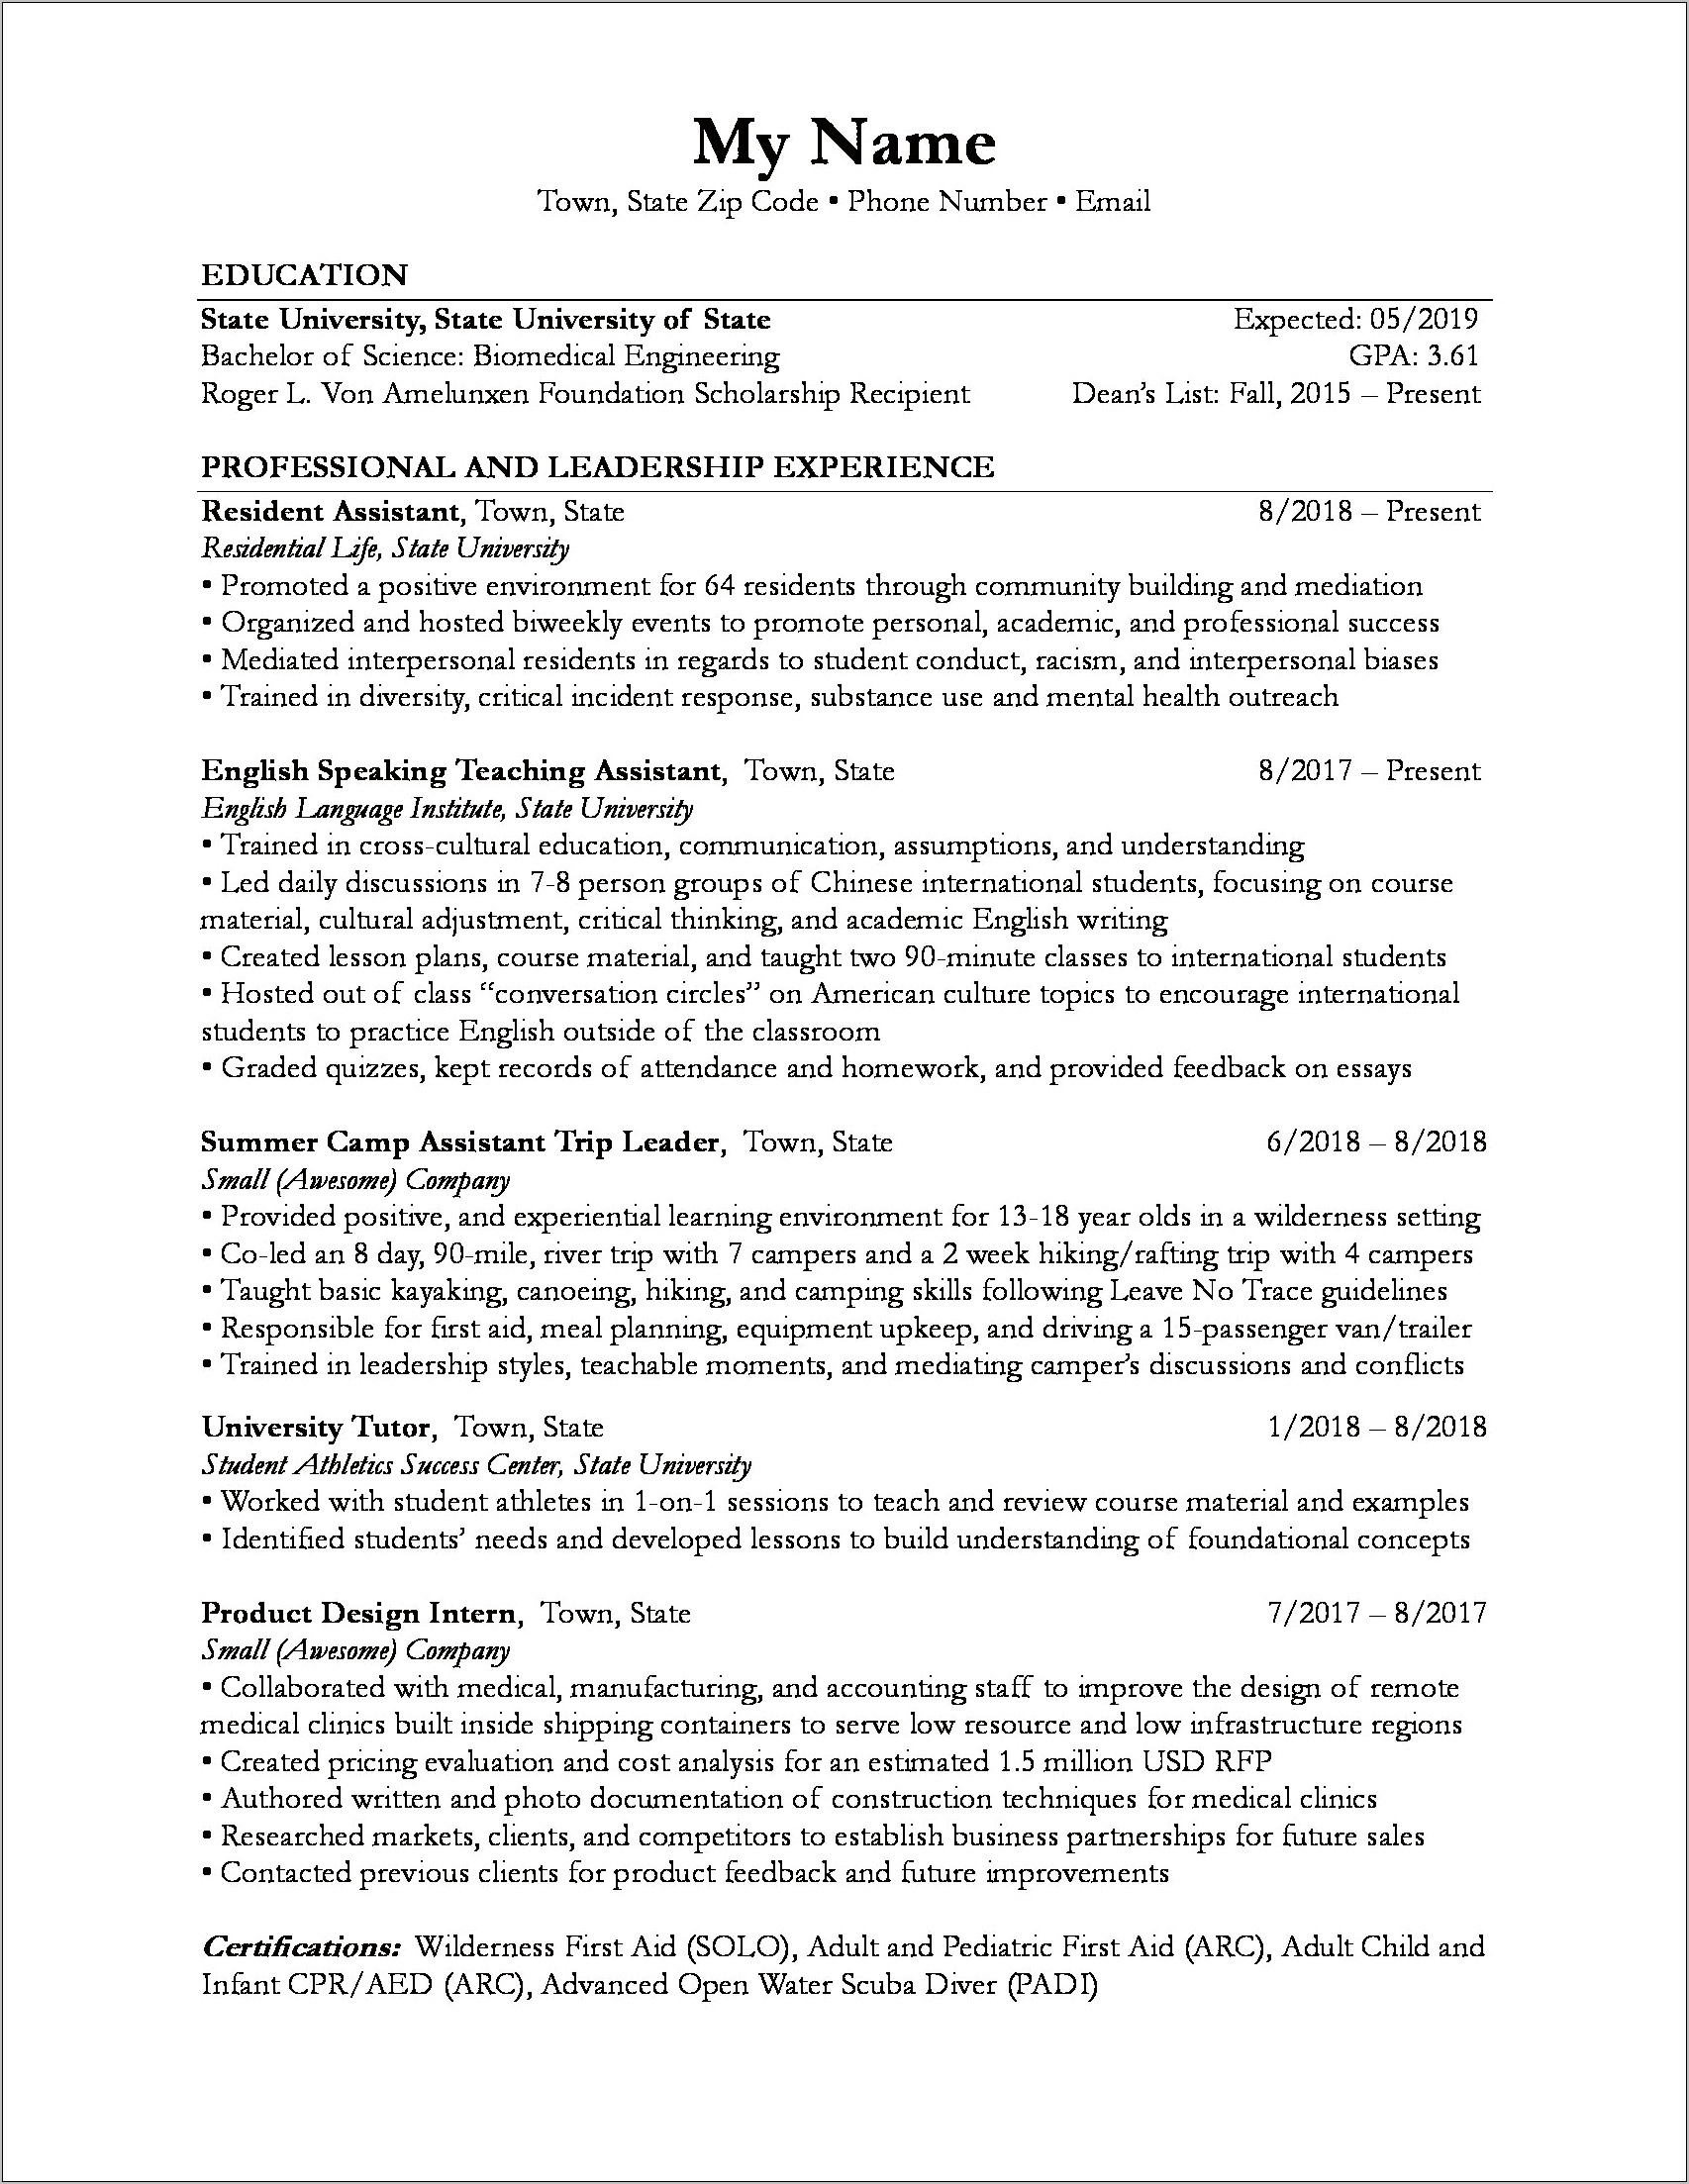 Putting Study Abroad Experience On Resume